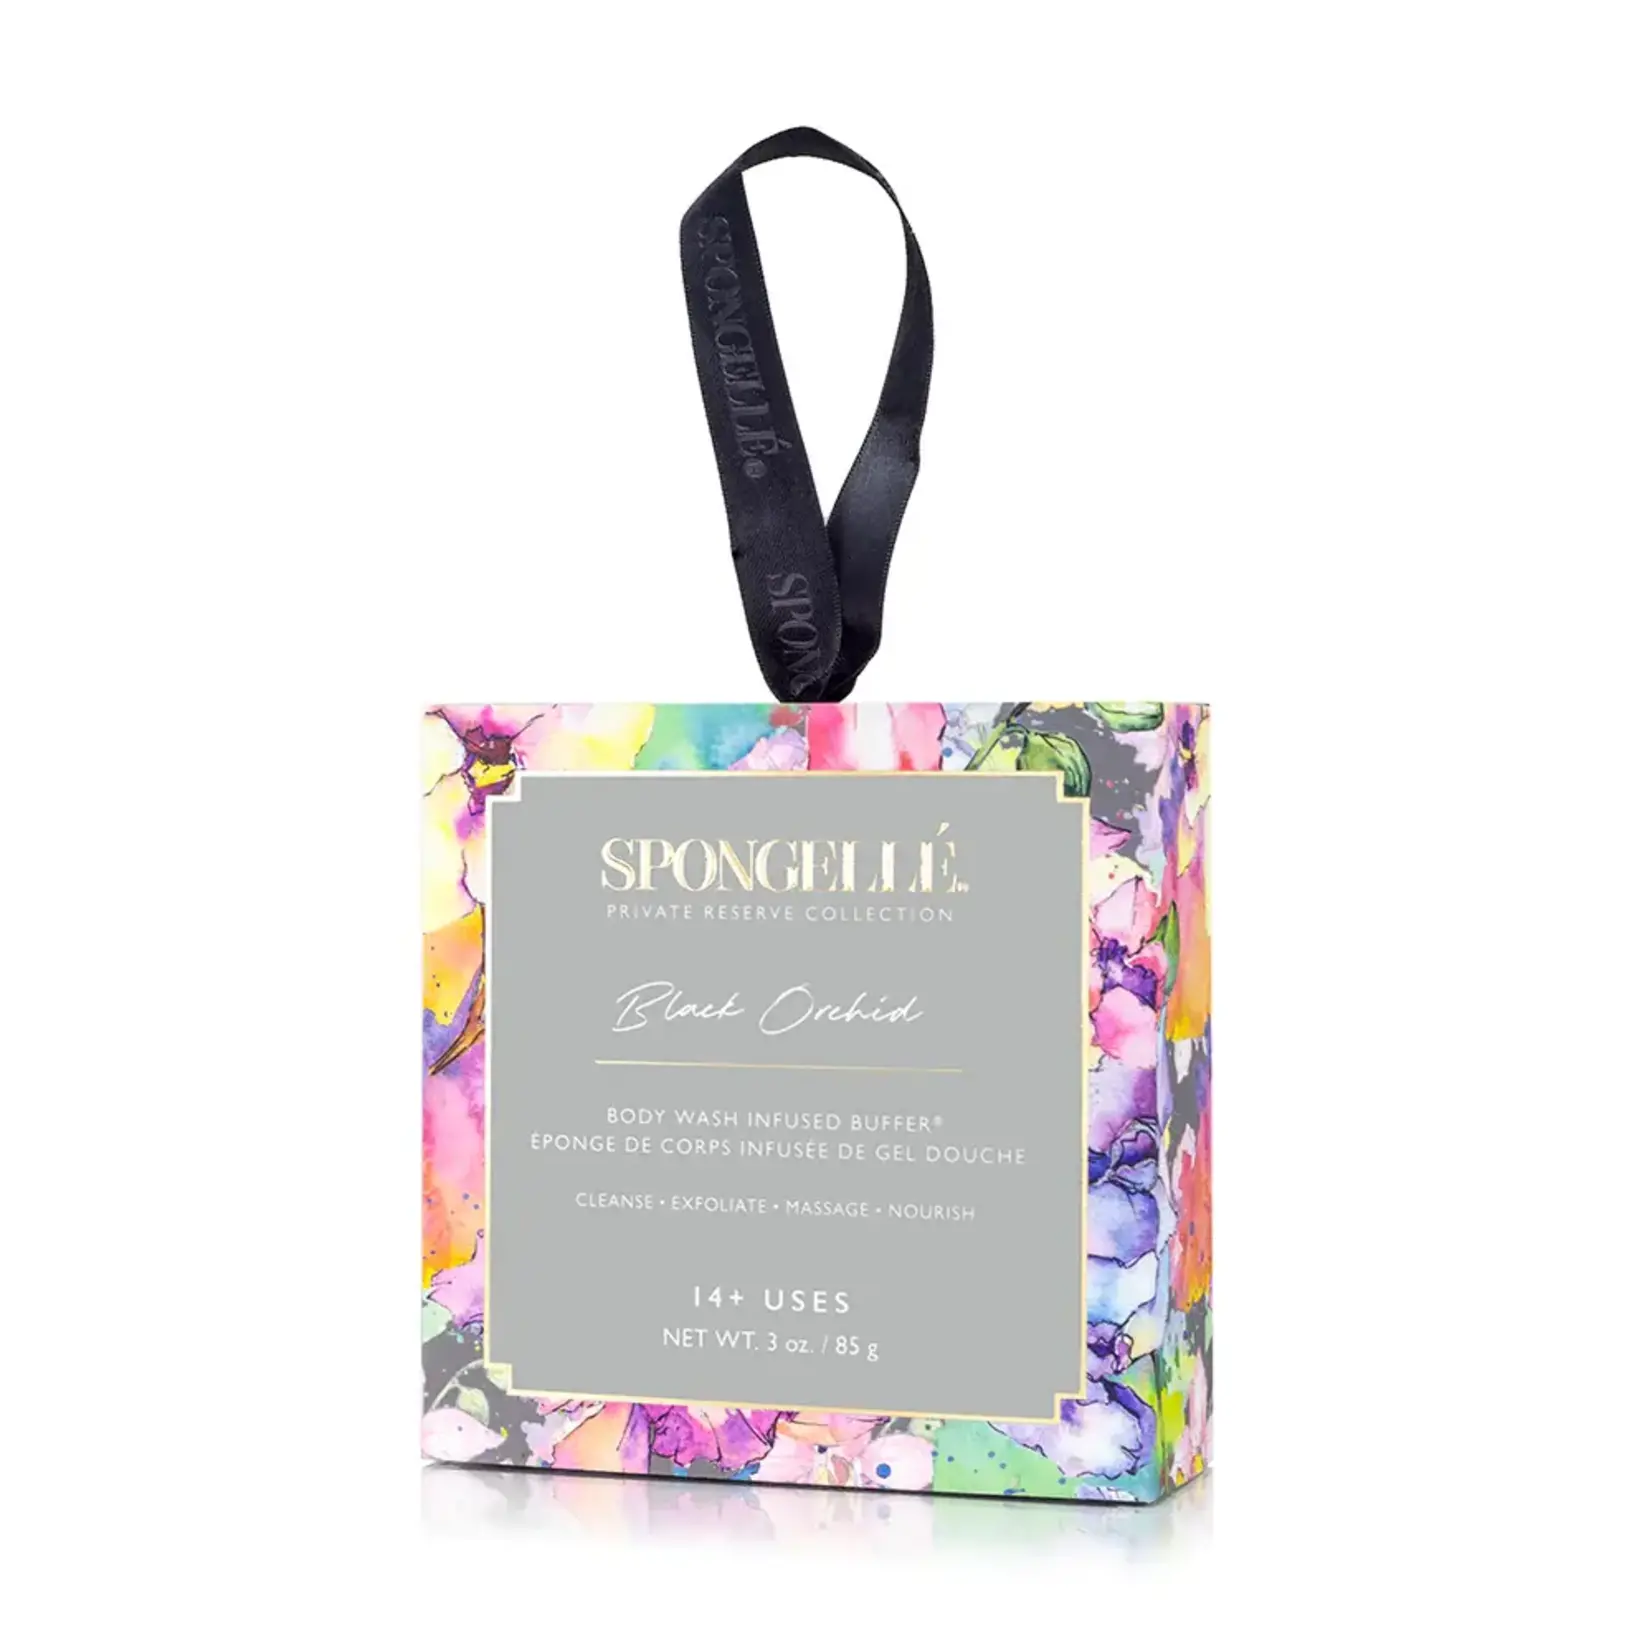 Spongelle PRIVATE RESERVE COLLECTION BOXED FLOWER BLACK ORCHID (14+ USES) 3OZ